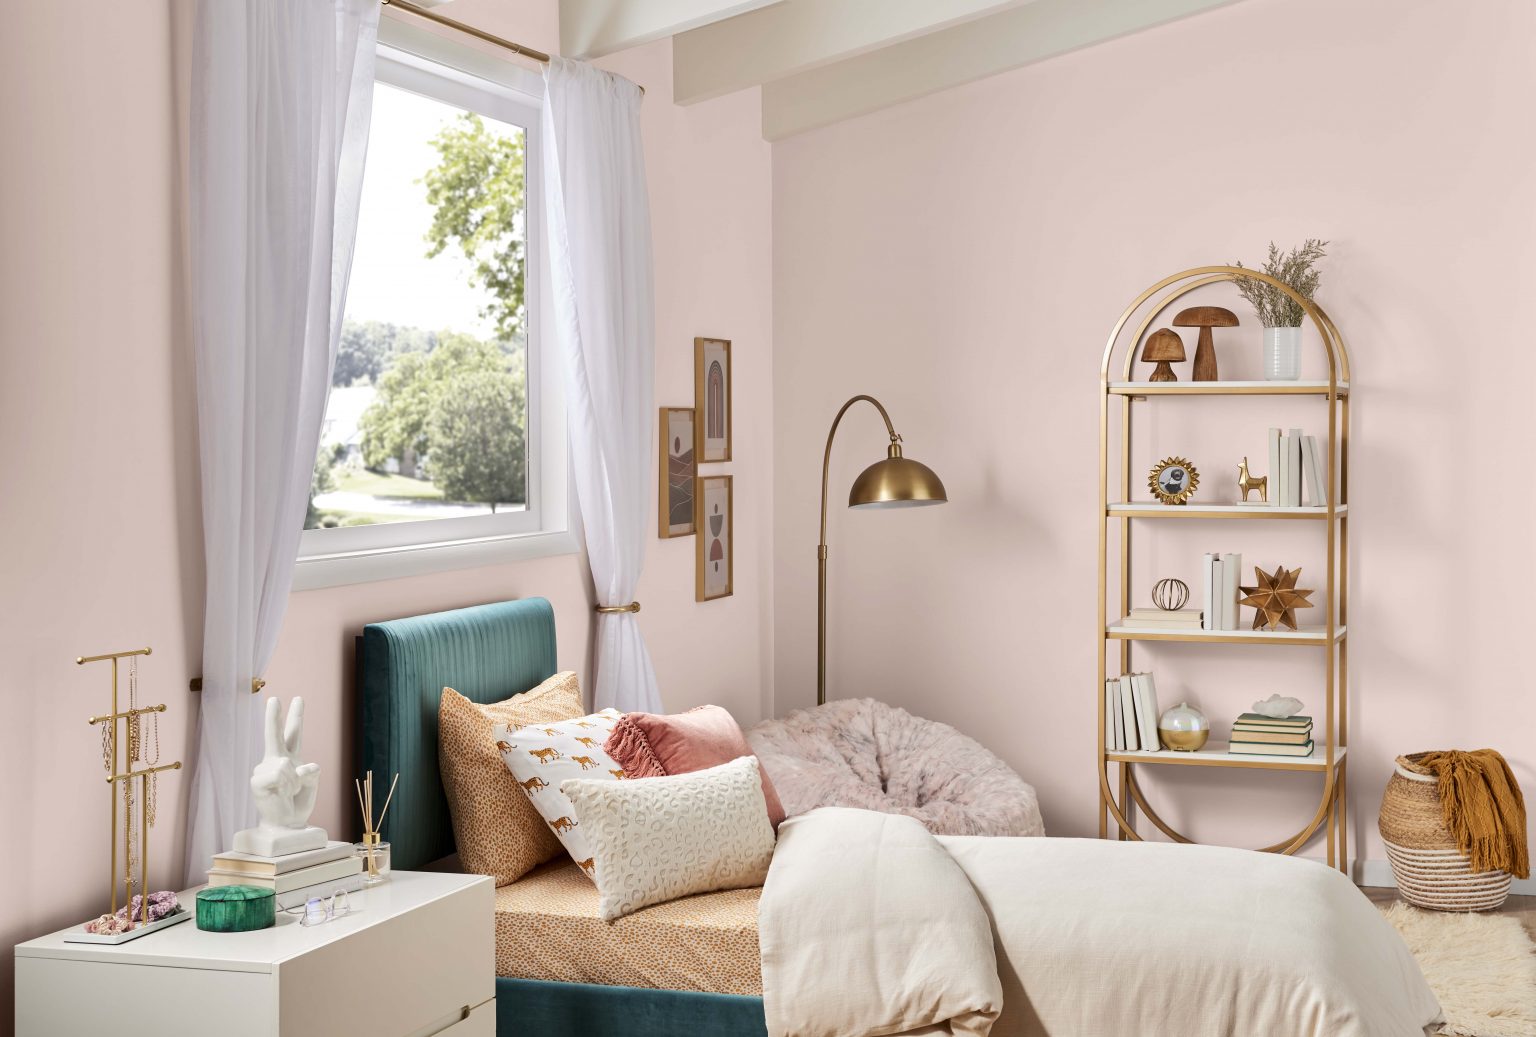 A teen bedroom with walls painted in a neutral light pink colour, styled with neutral and metallic gold décor accents 